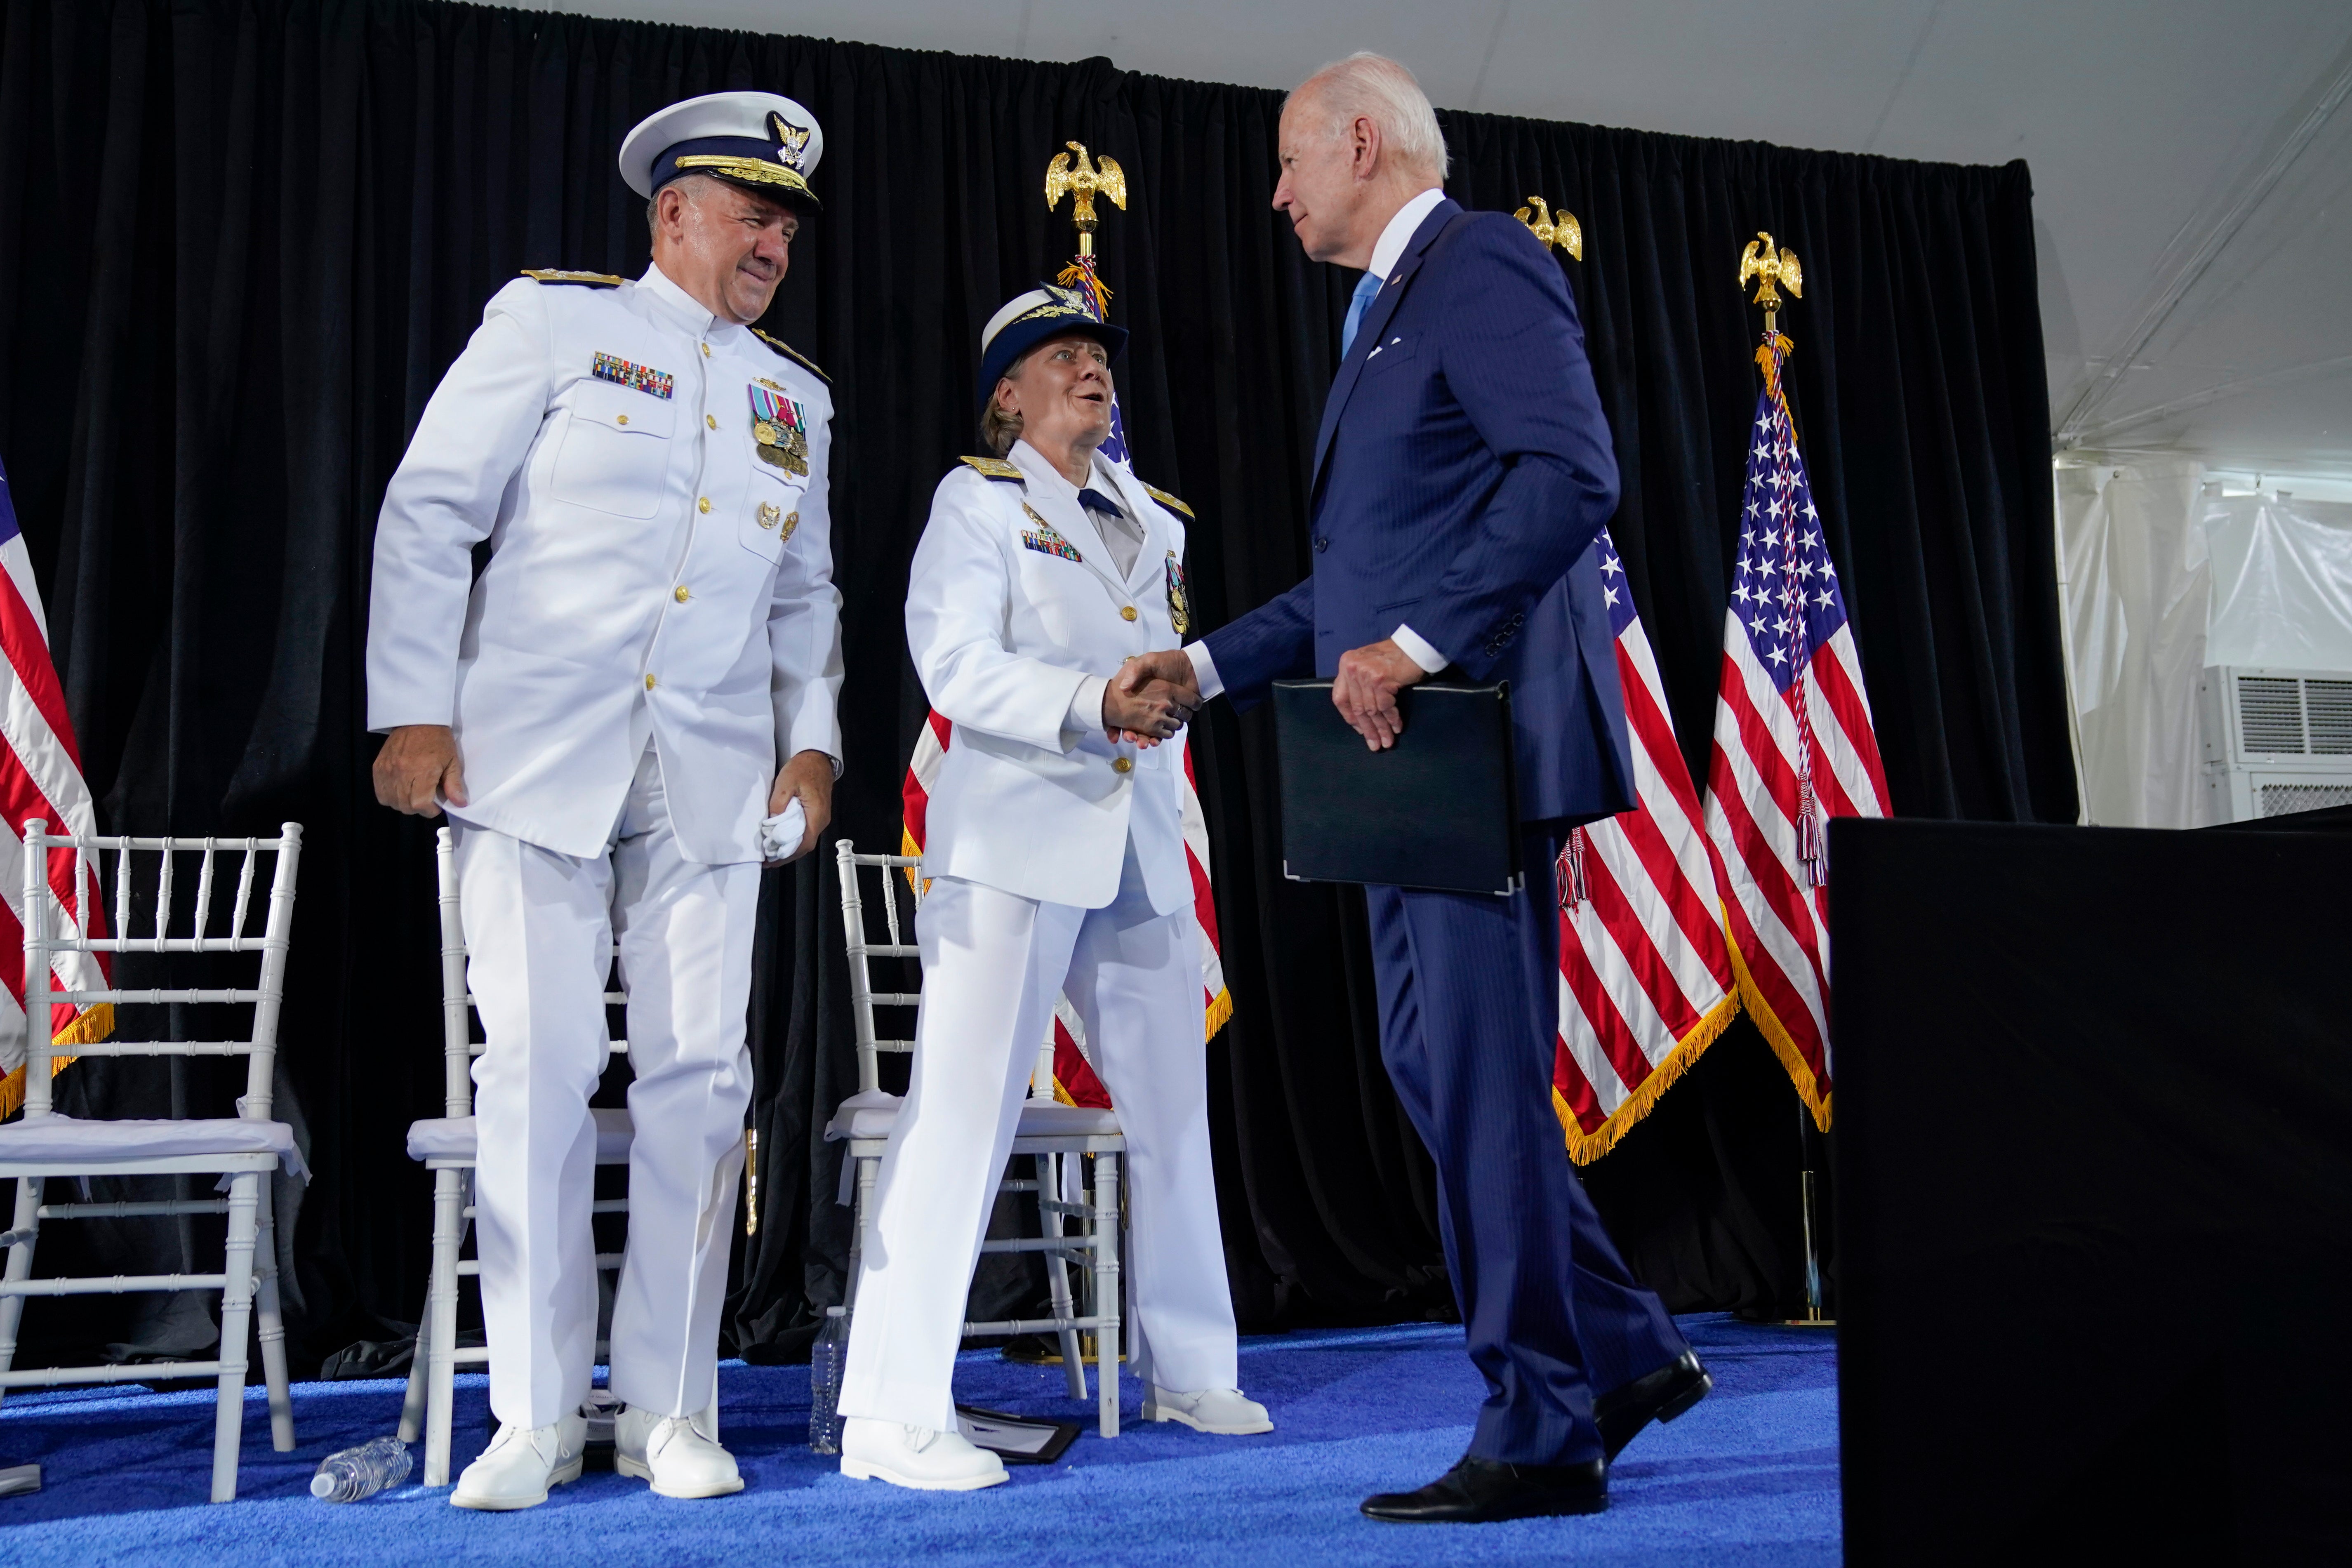 President Joe Biden shakes hands with Adm. Linda Fagan after speaking during a change of command ceremony at U.S. Coast Guard headquarters, Wednesday, June 1, 2022, in Washington. Adm. Karl L. Schultz is being relieved by Adm. Linda Fagan as the Commandant of the U.S. Coast Guard. (AP Photo/Evan Vucci)